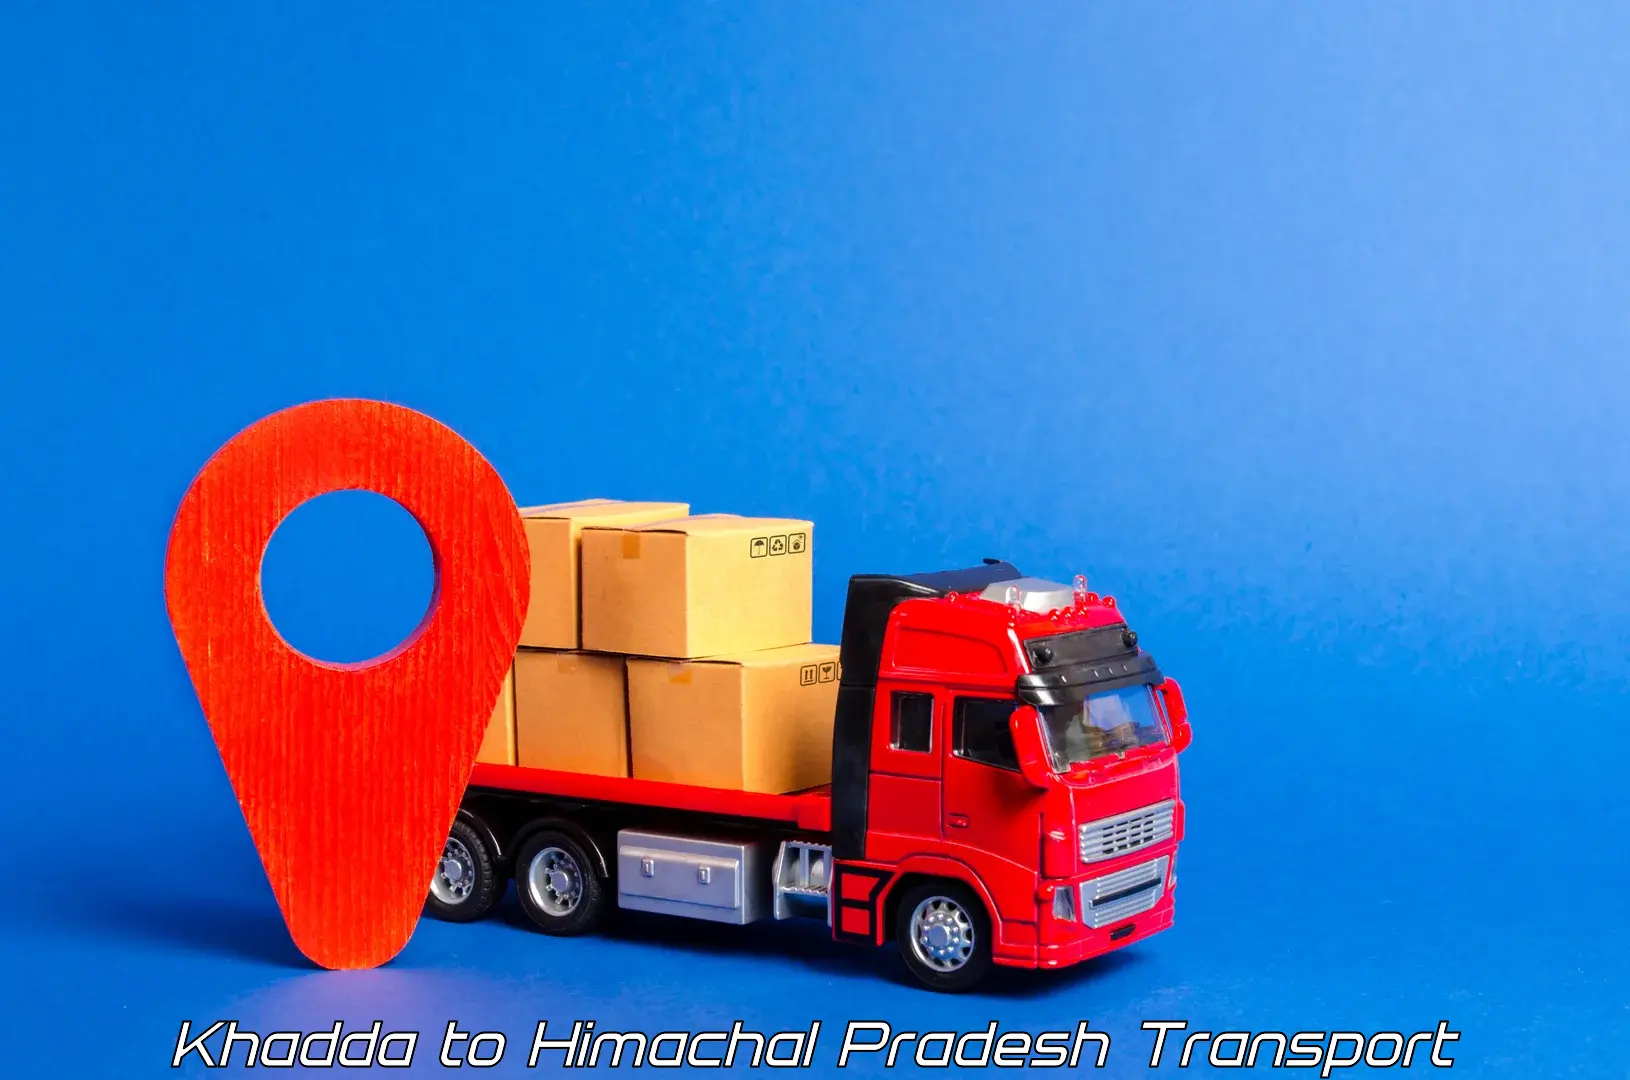 Daily parcel service transport Khadda to Chachyot